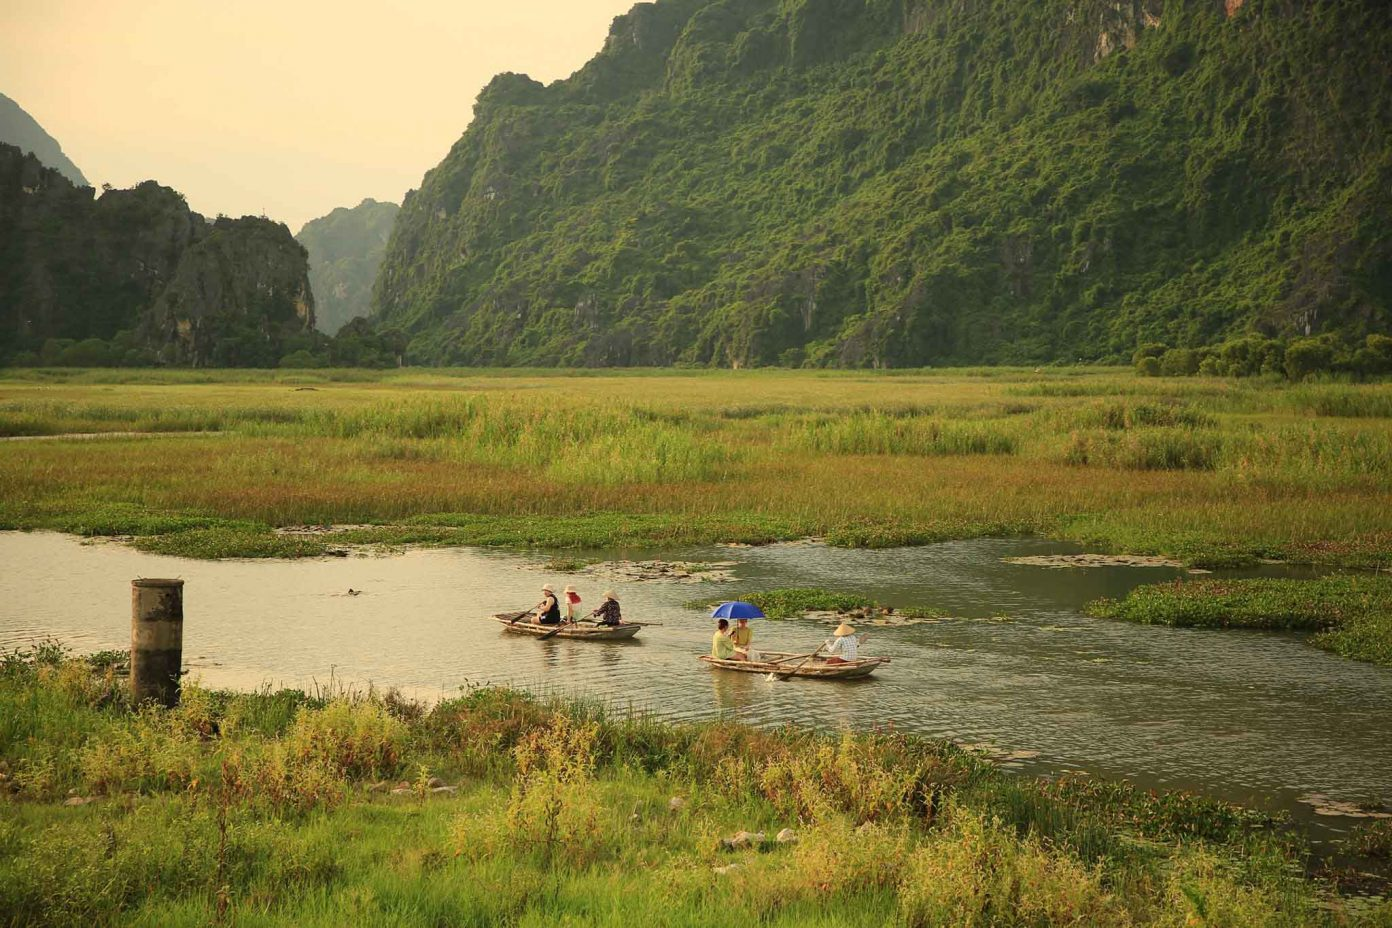 Van Long Lagoon - the “place with the largest natural picture”